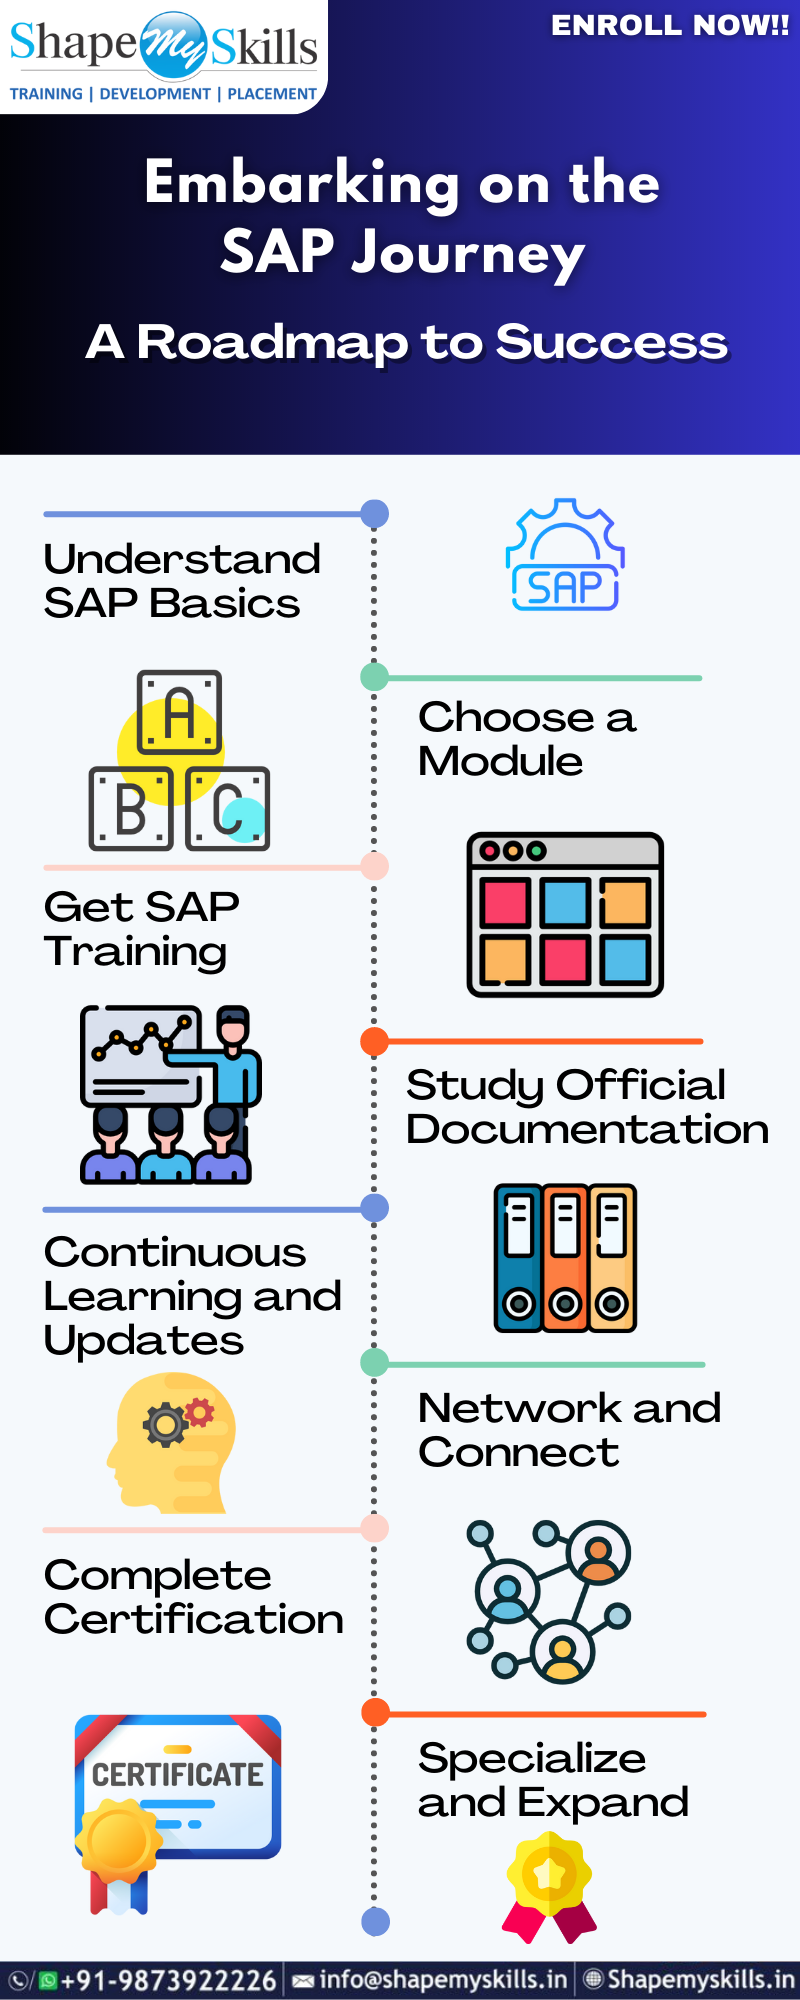 Embarking on the SAP Journey- A Roadmap to Success